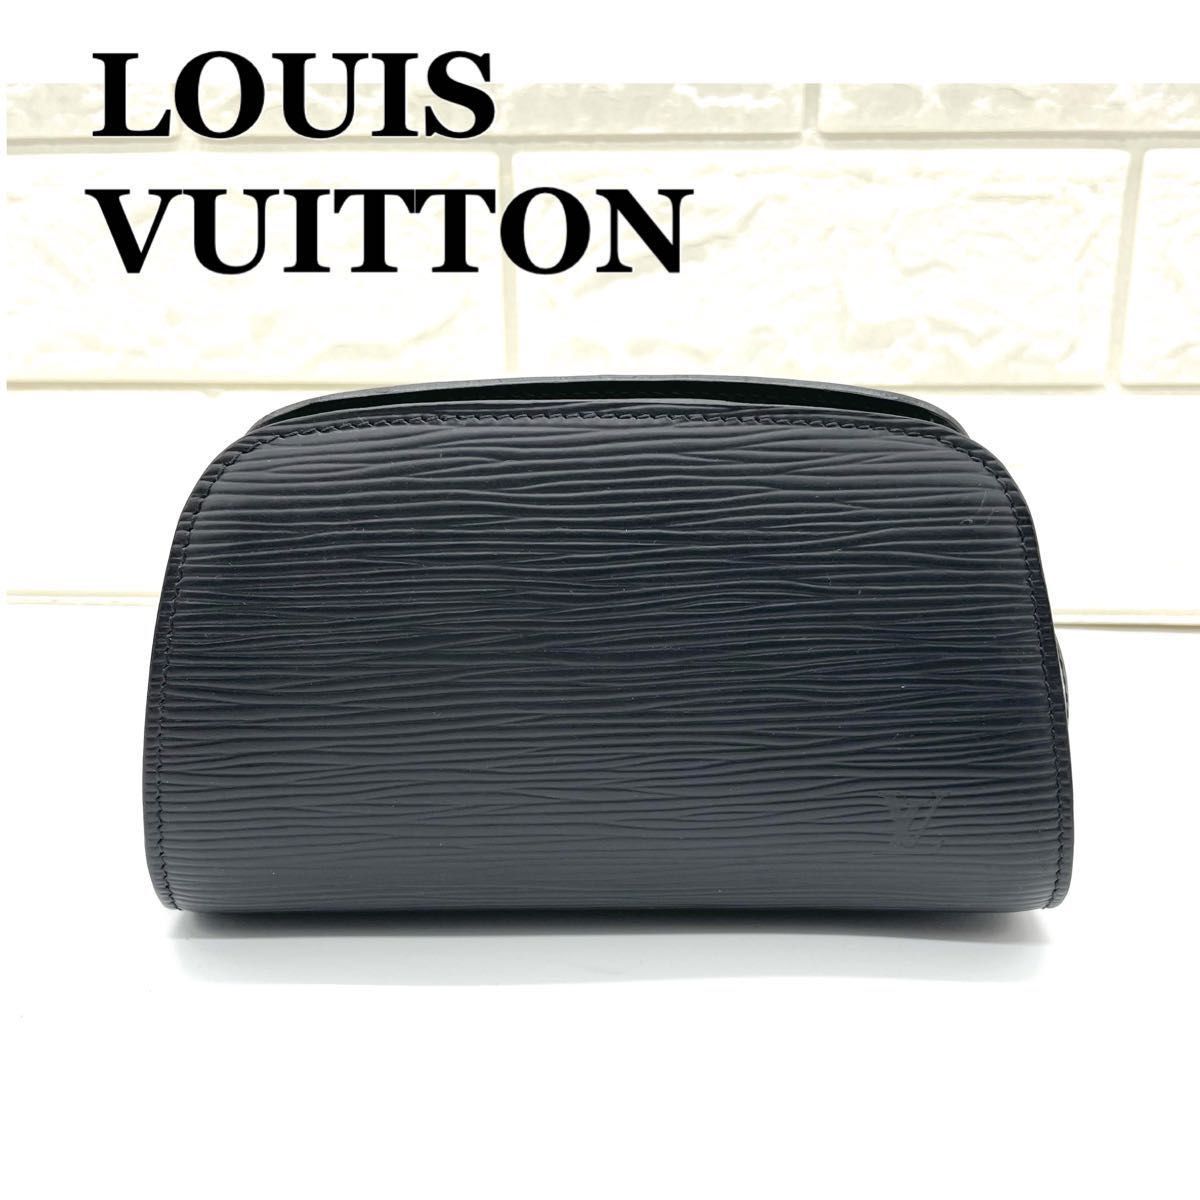 LOUIS VUITTON ルイ ヴィトン エピ ドーフィーヌpm ポーチ 黒